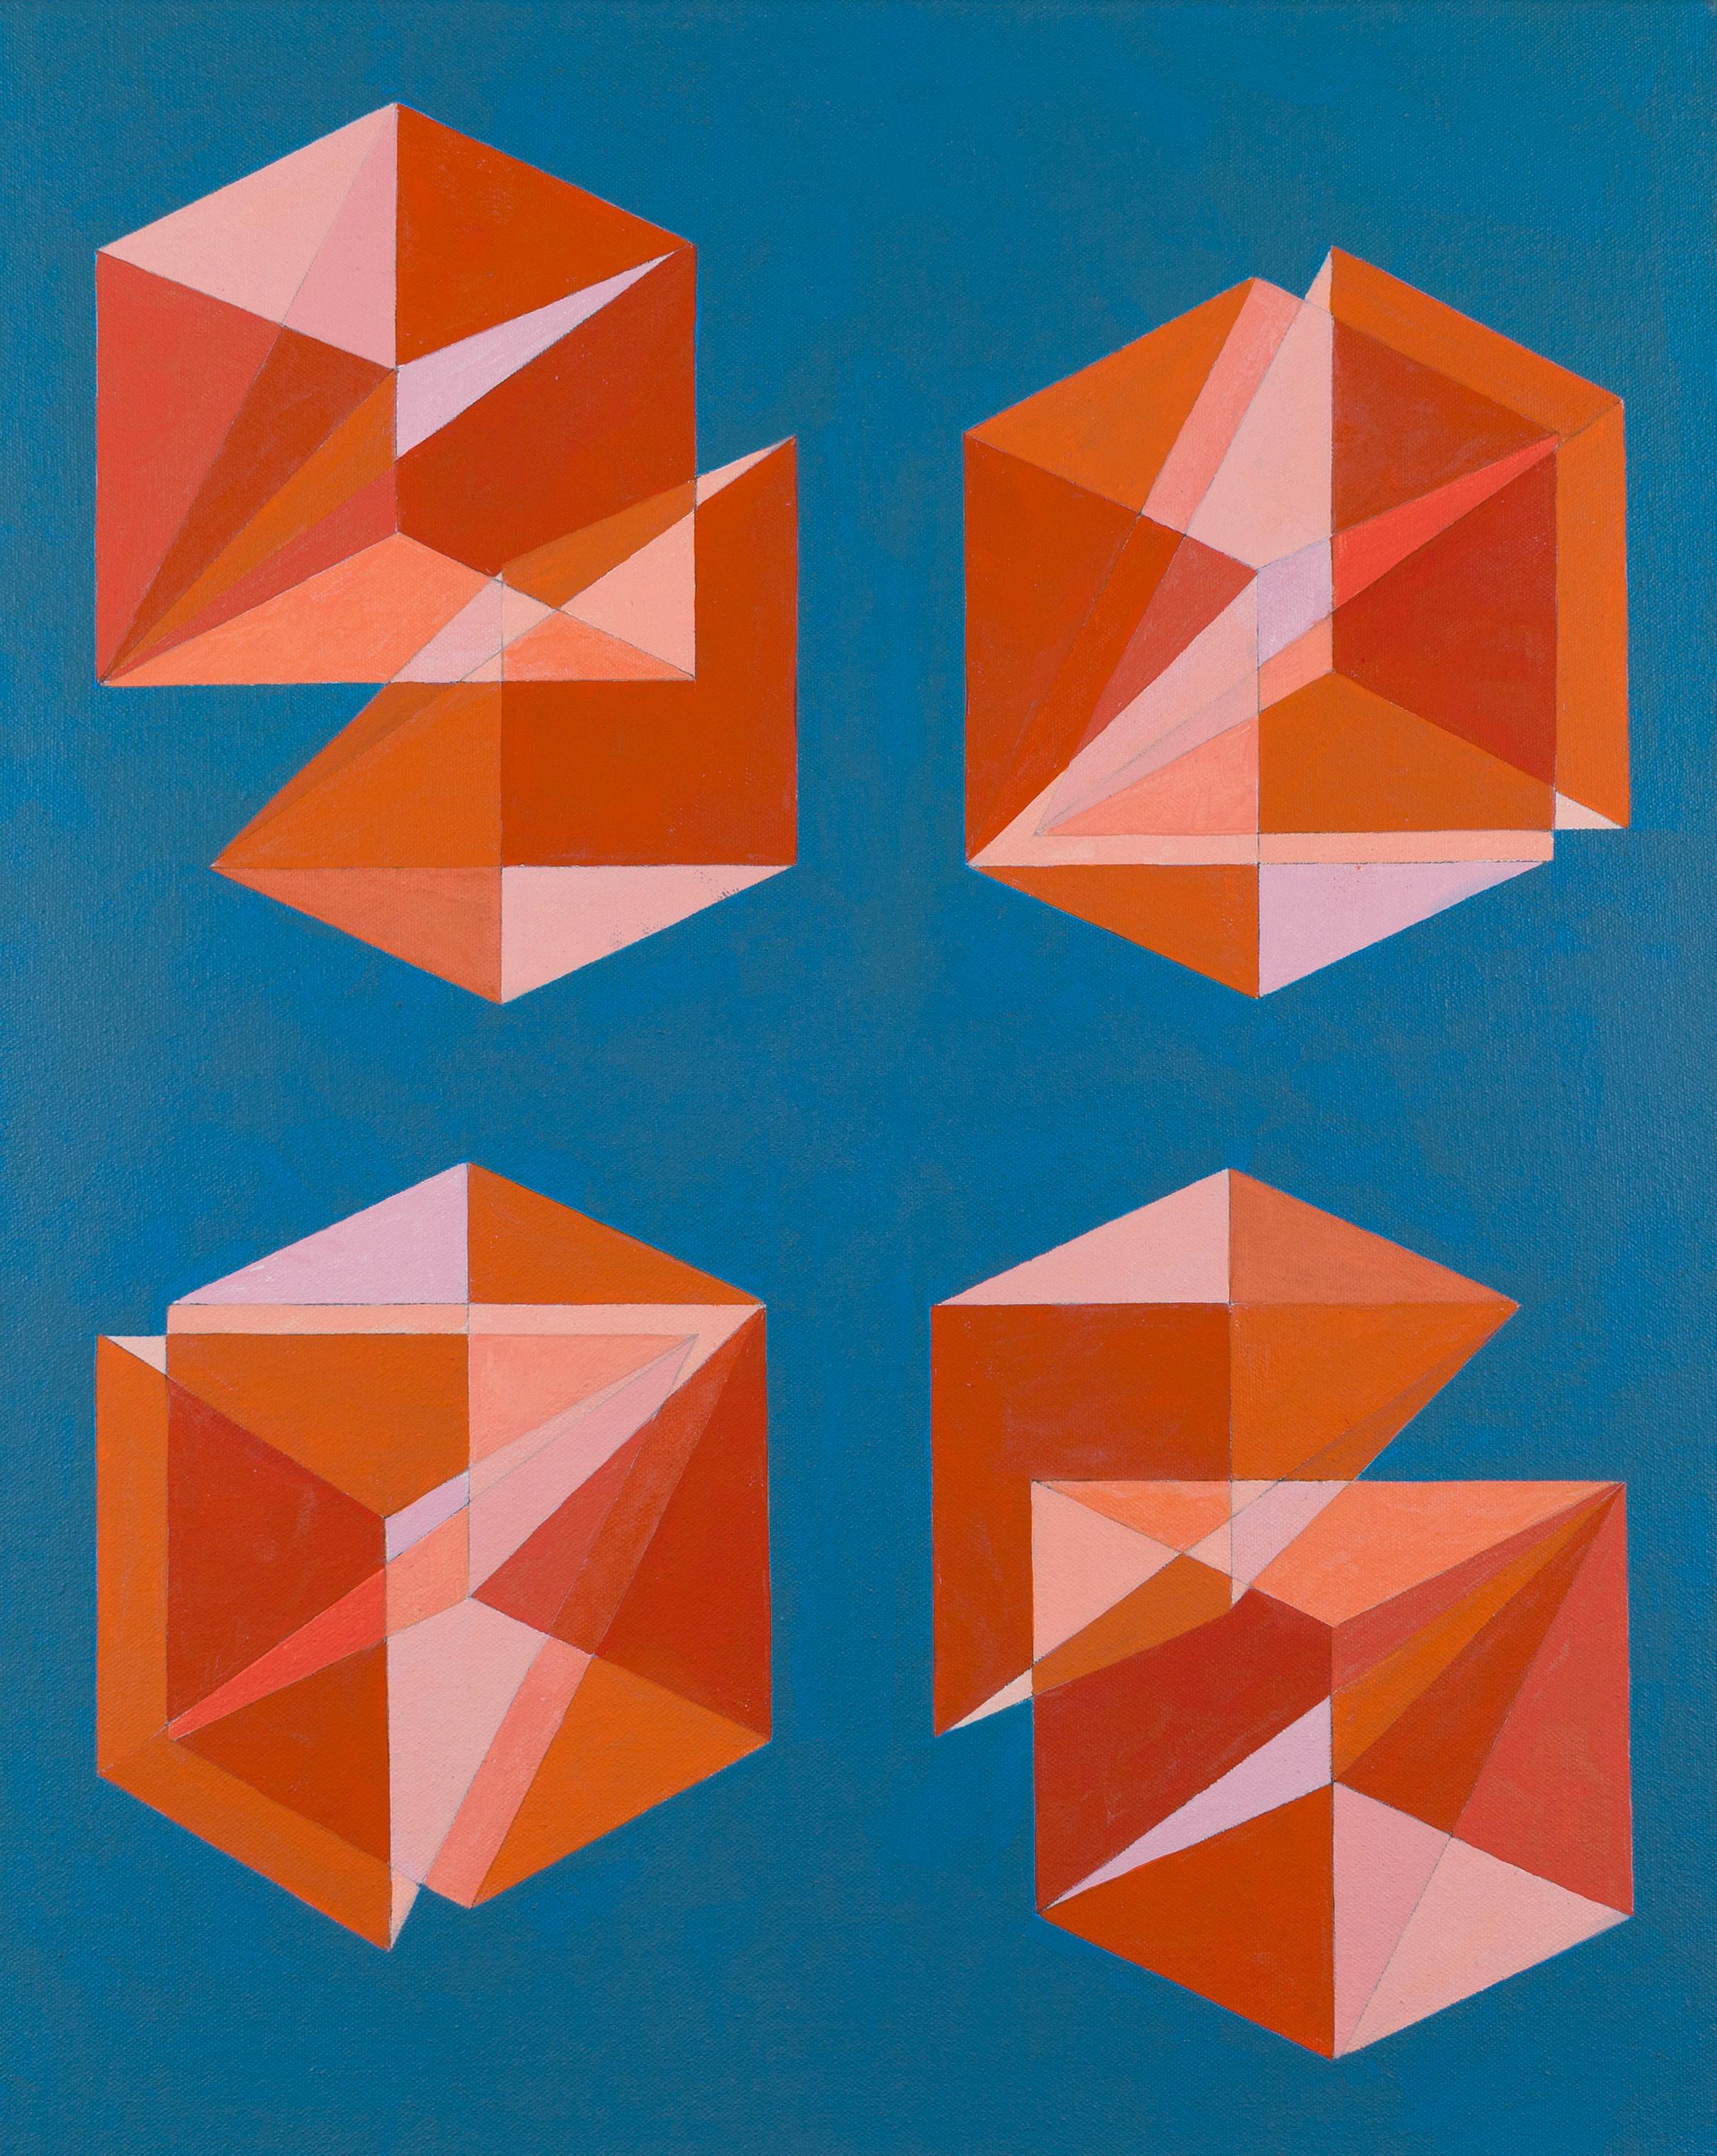 Benjamin Weaver Figurative Painting - Cubes Divided Equally into Three #13: geometric abstract painting w/ pink & blue